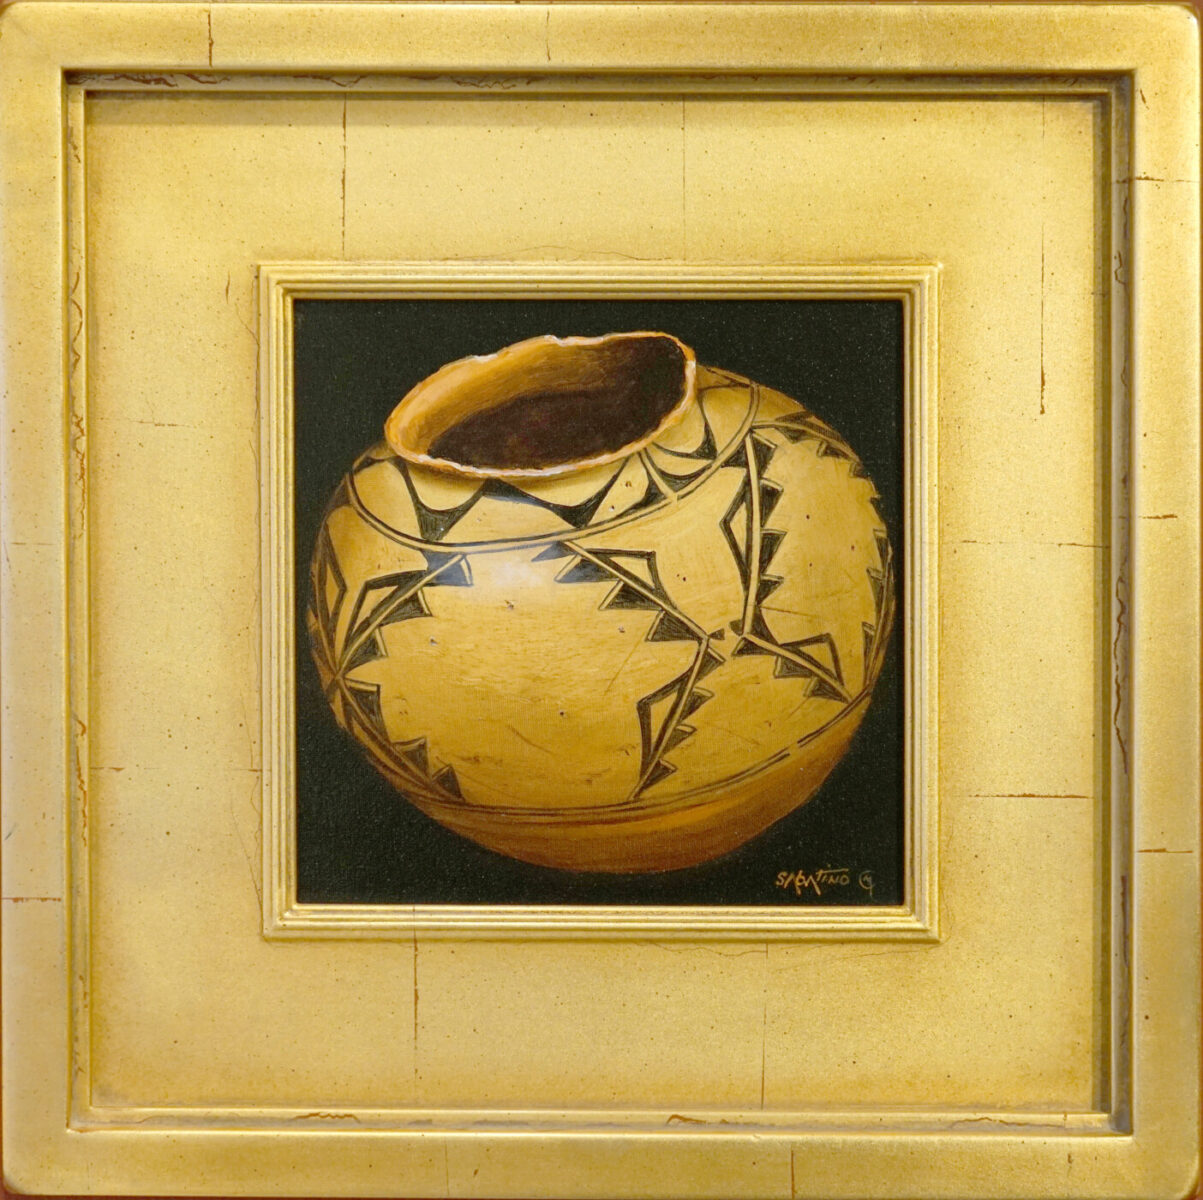 Oil painting of native american pottery by Chuck Sabatino